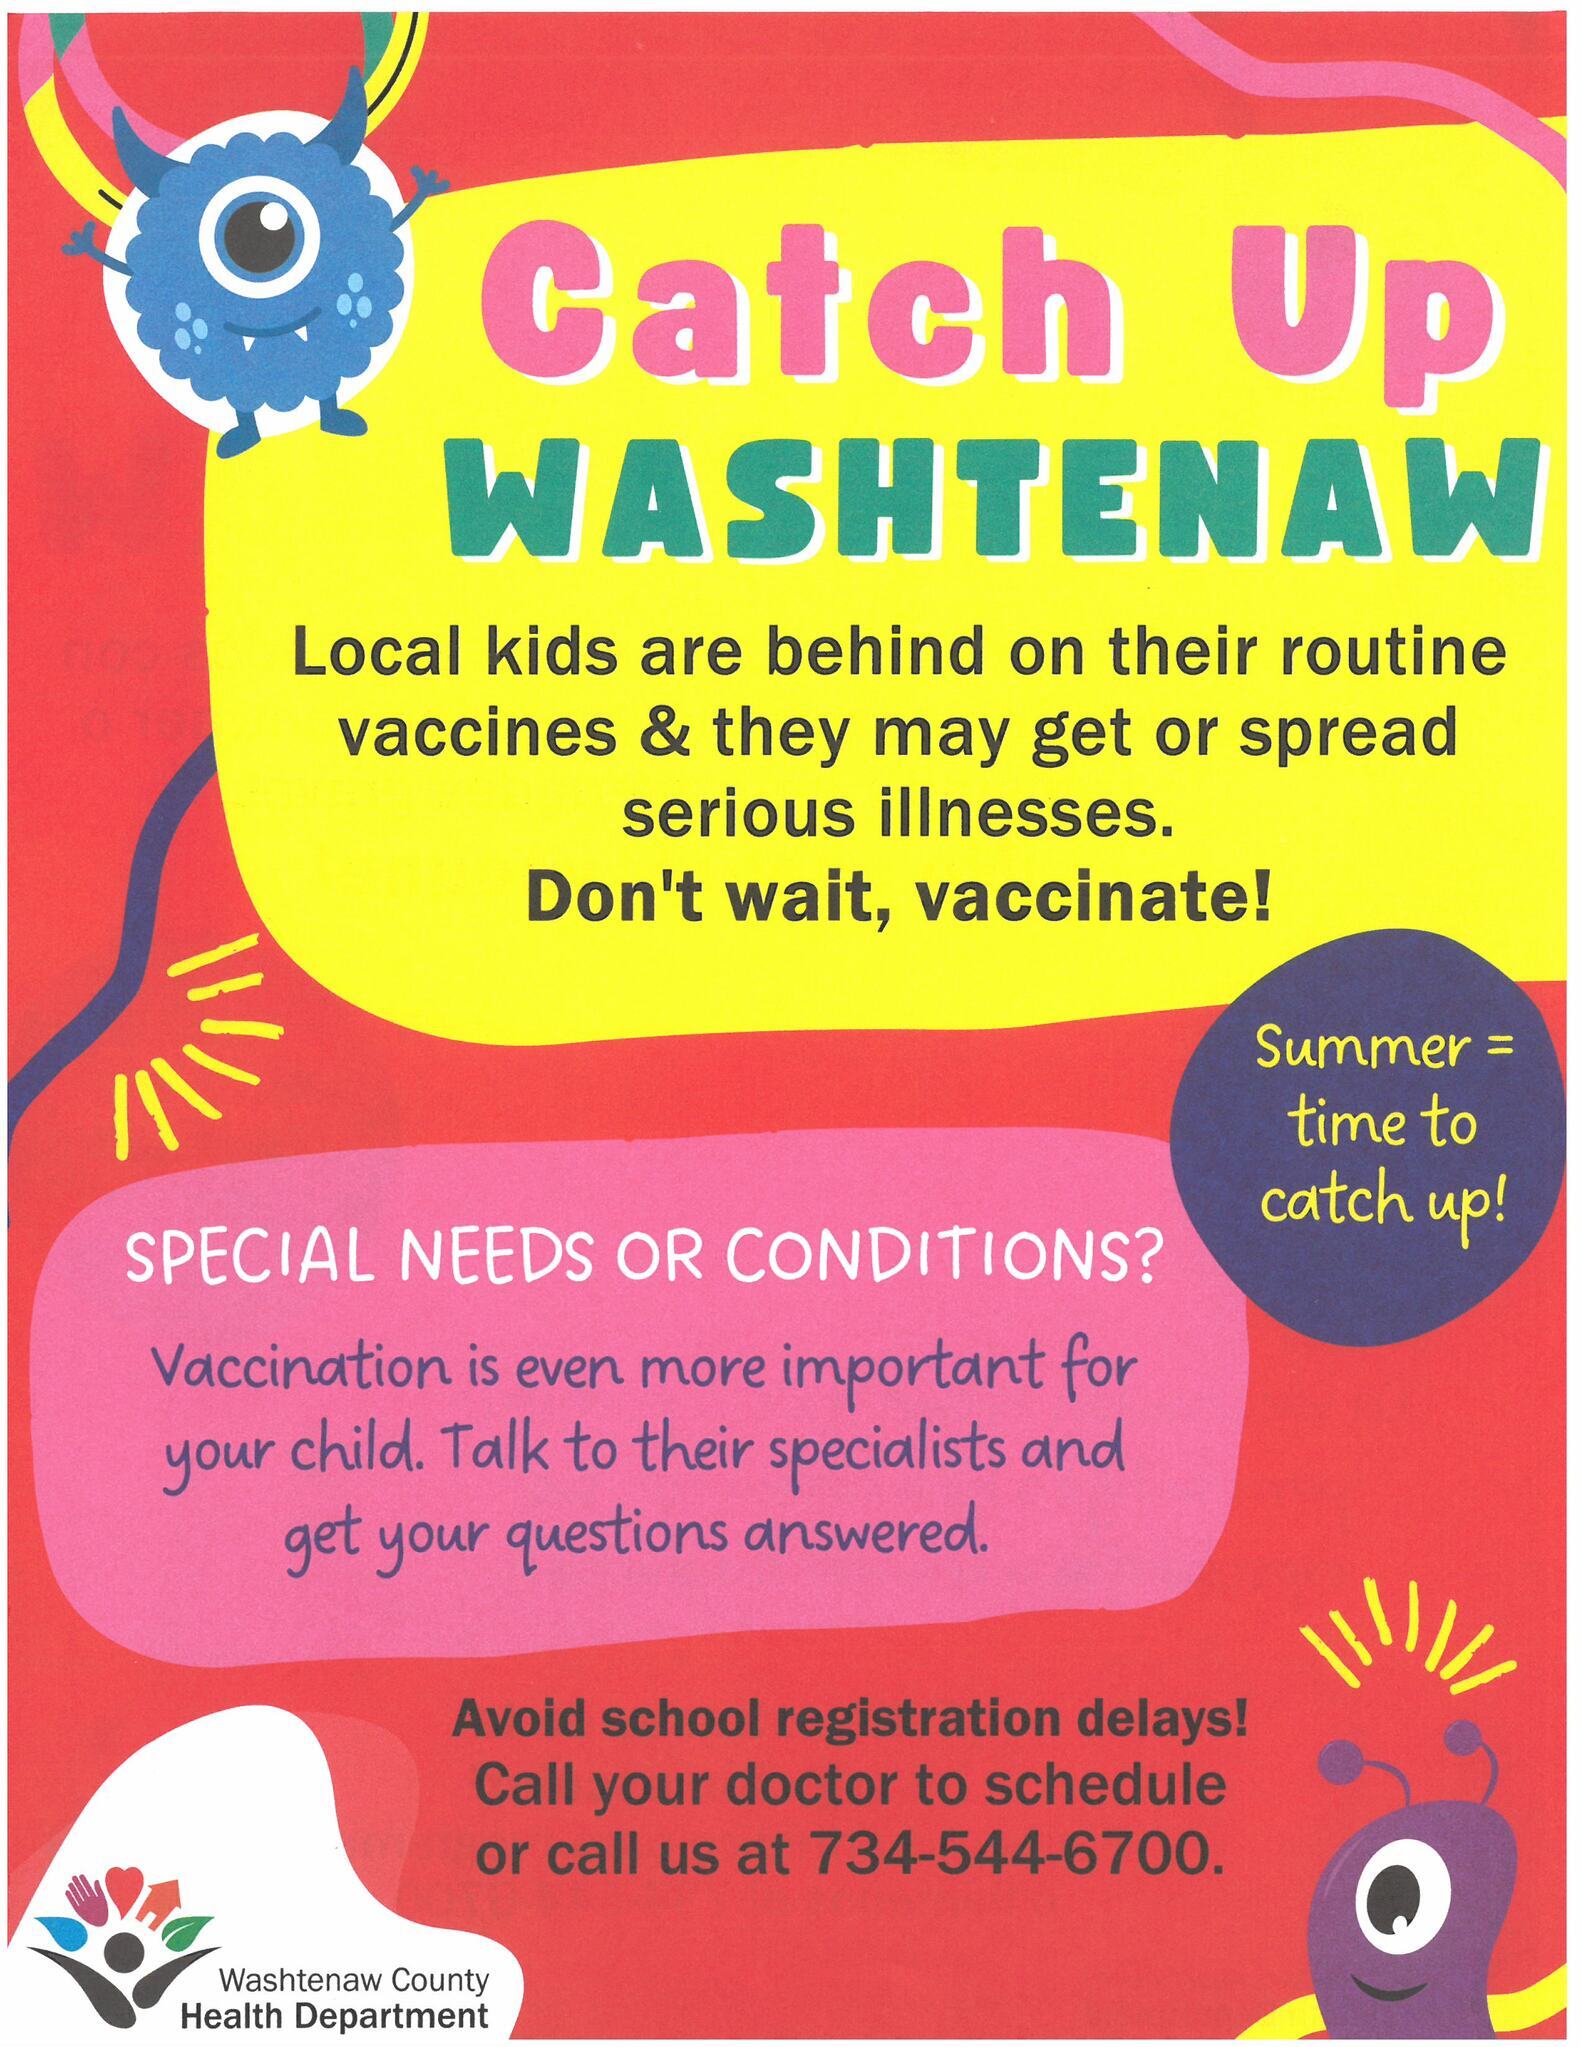 Catch Up on Vaccinations this Summer